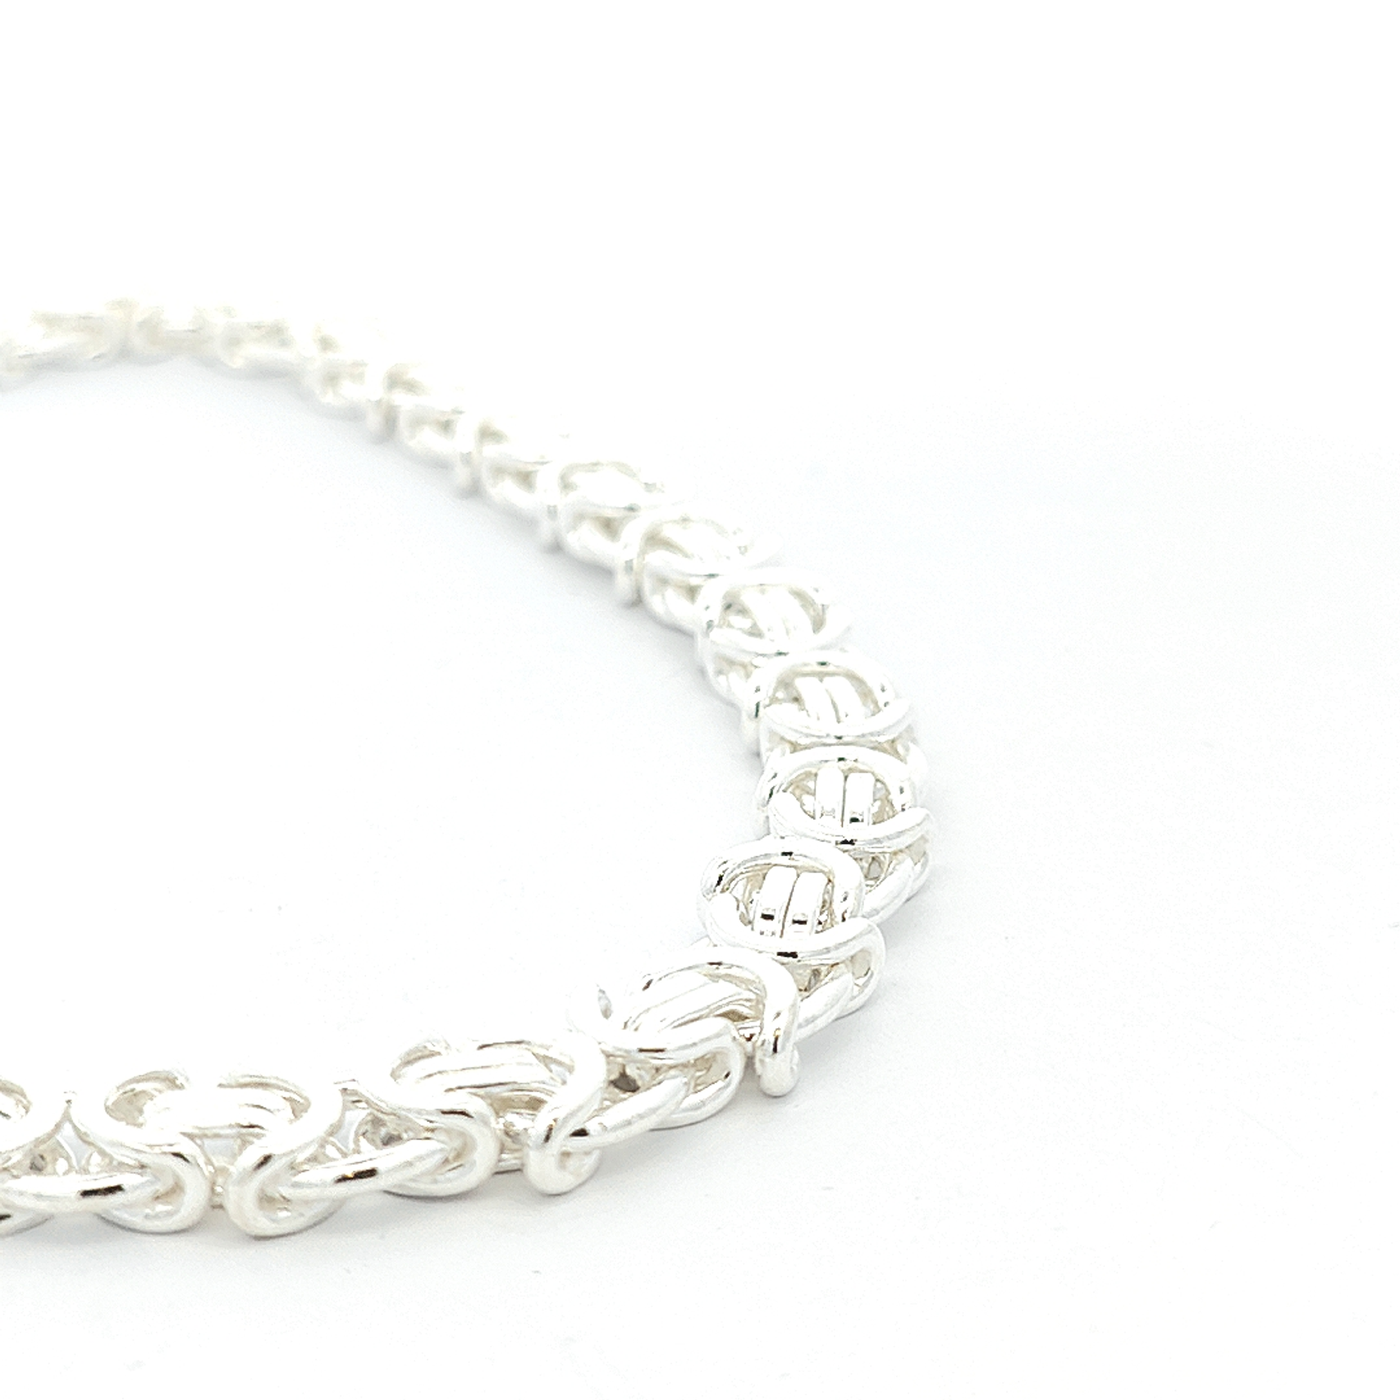 Flat Solid Silver Byzantine Chain, Width 10mm - boothandbooth